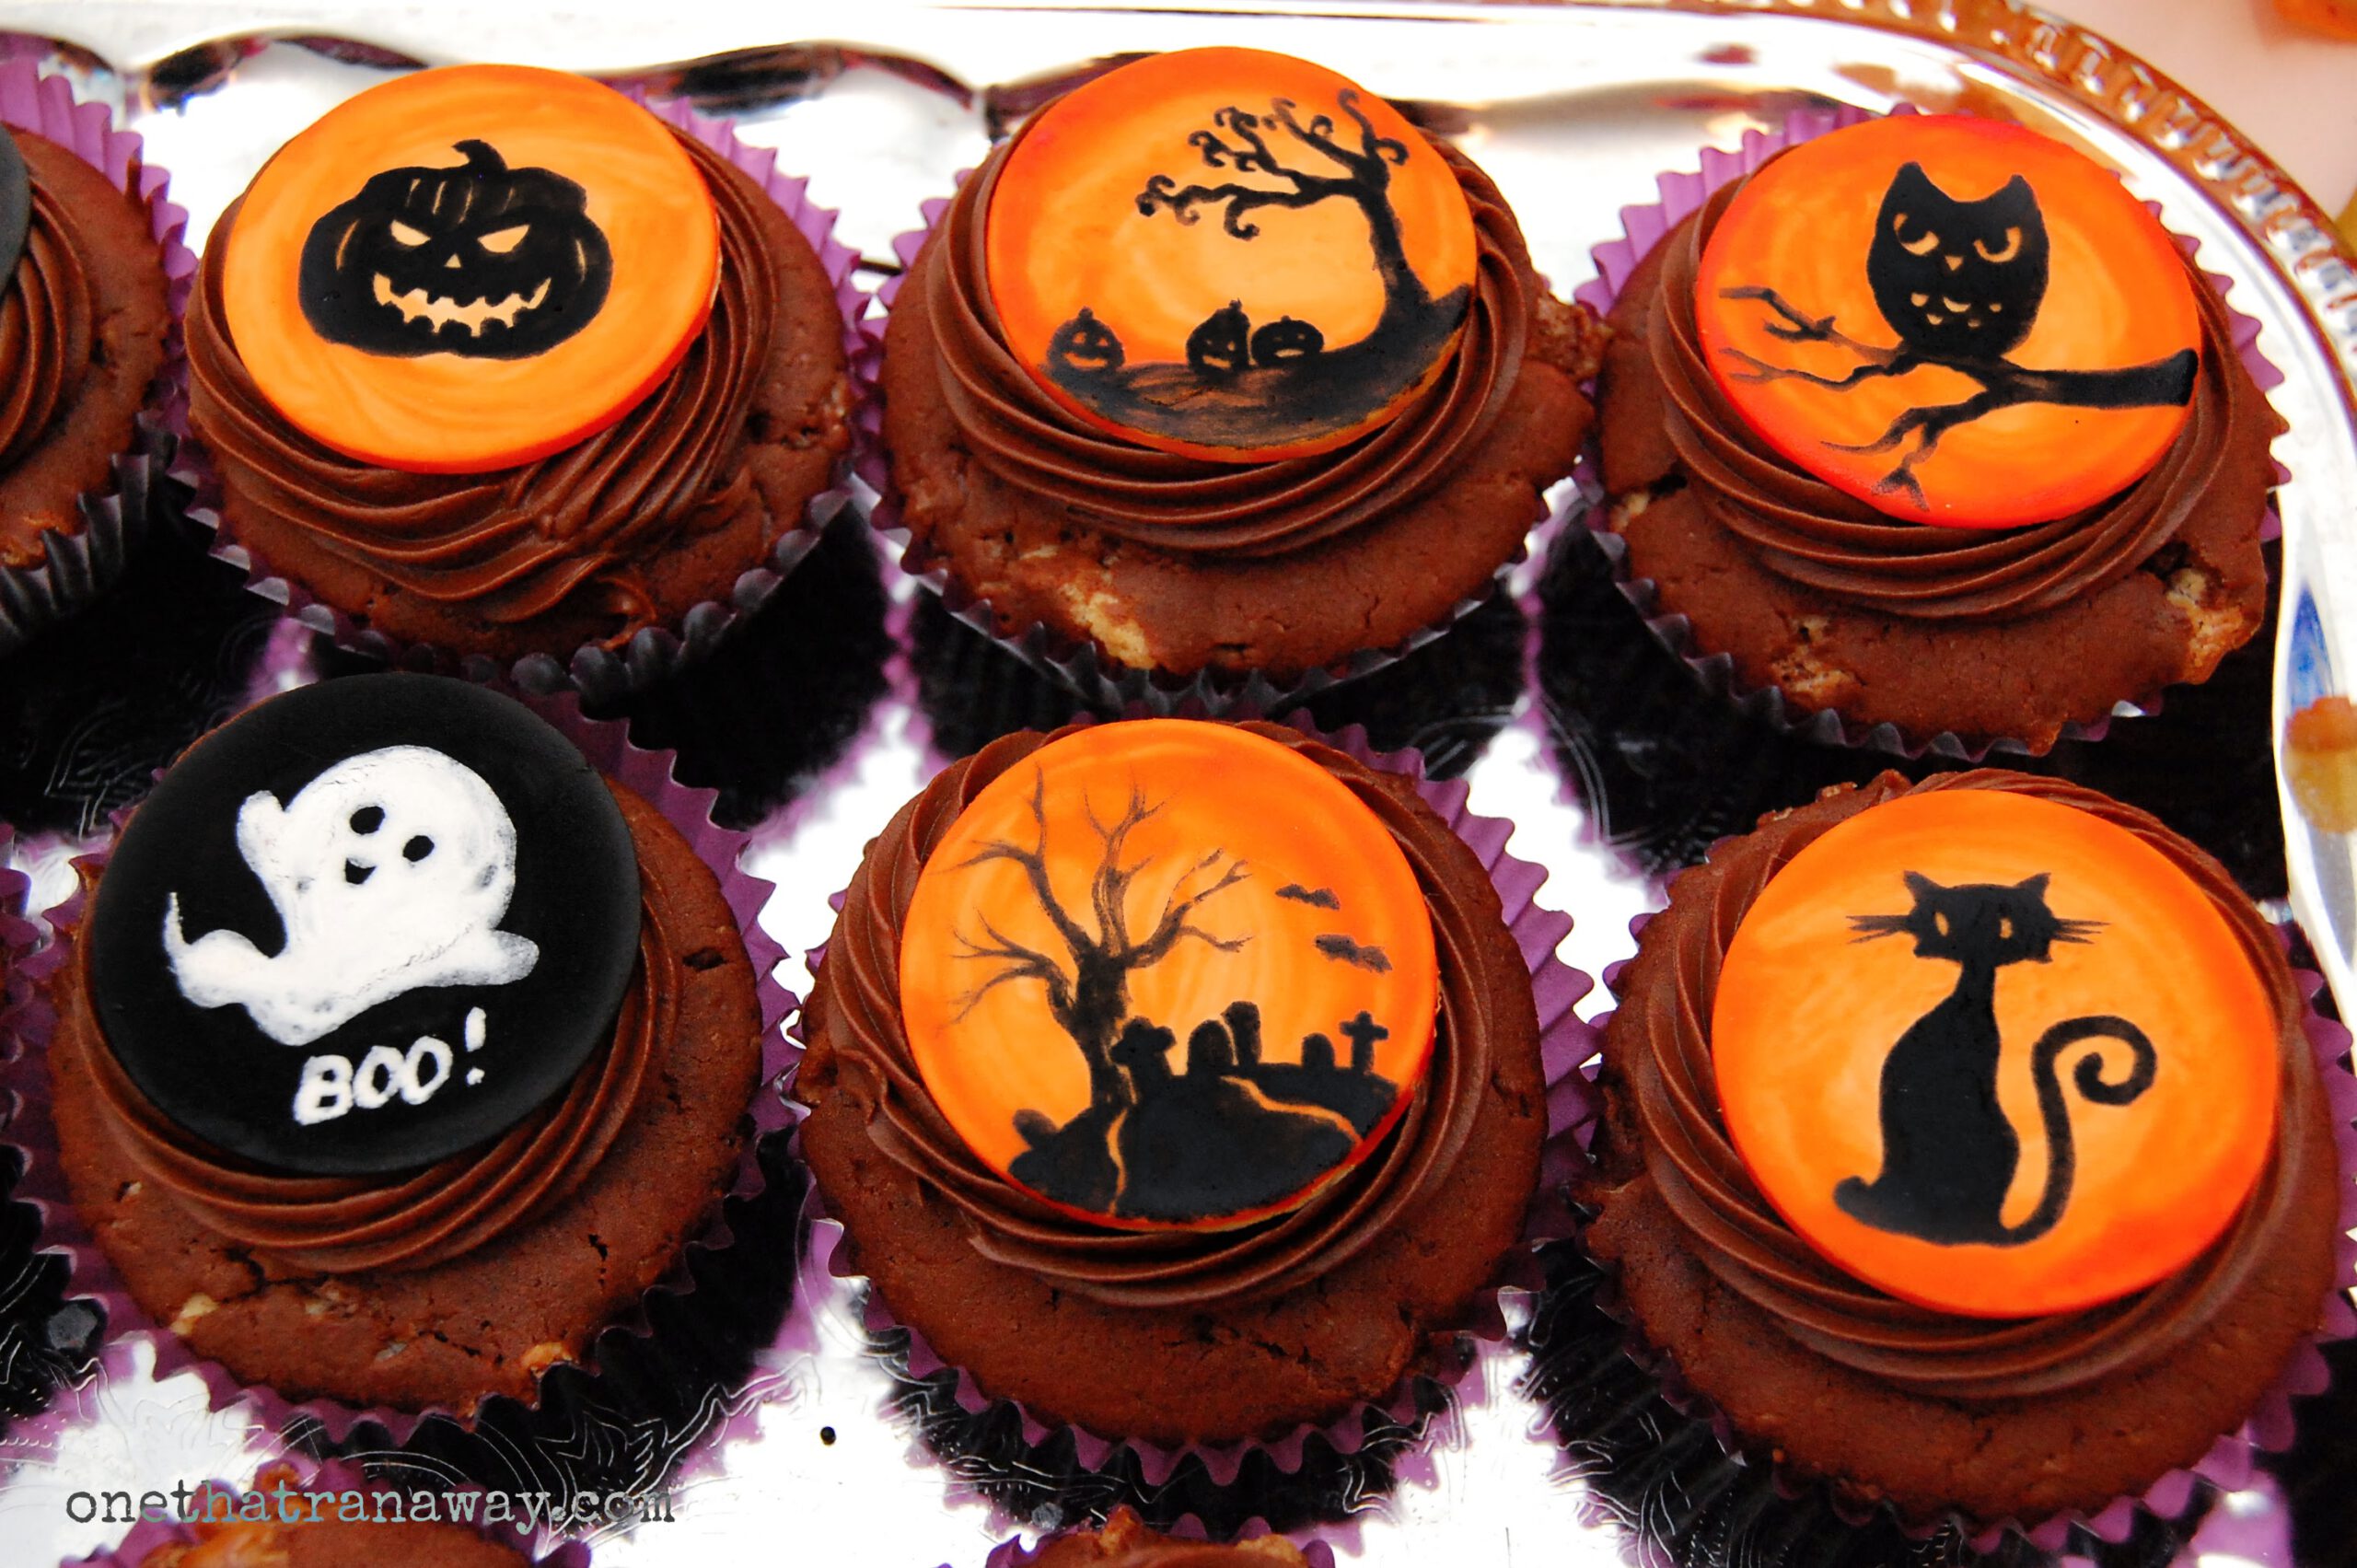 chocolate cupcakes with orange fondant toppers showing Halloween themed silhouettes on silver background